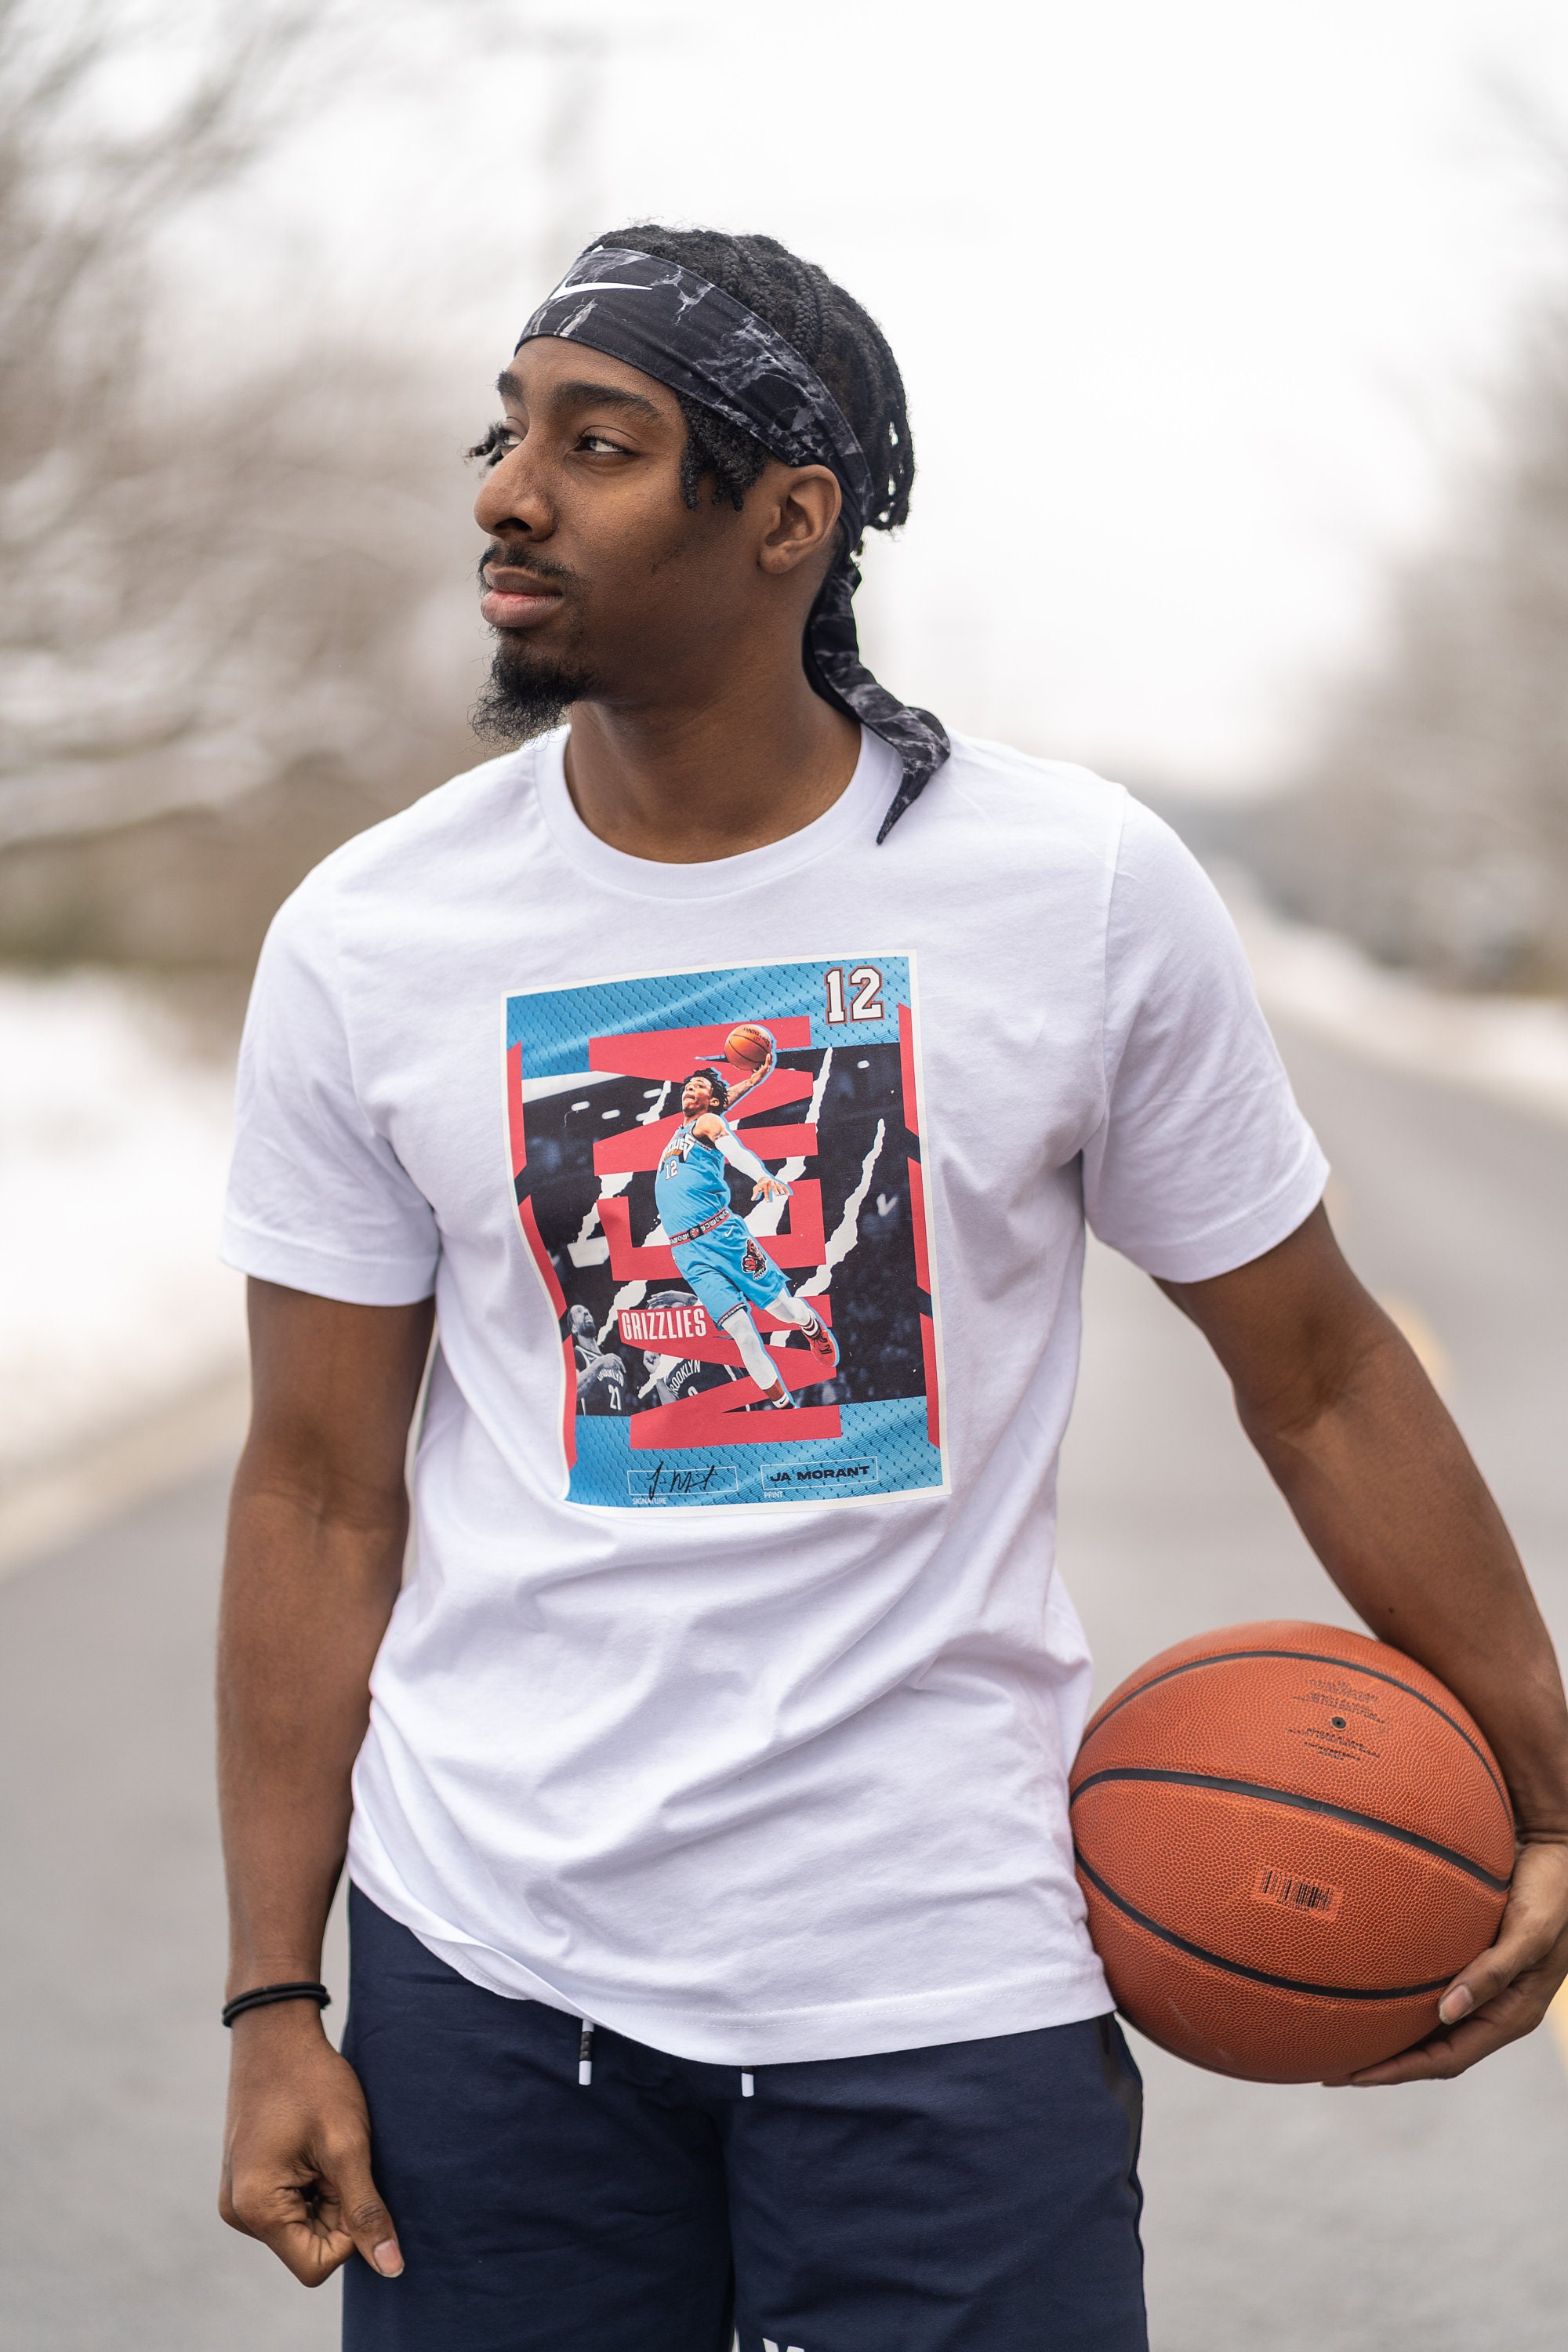 Ja Morant Grizzlies Graphic T-Shirt Dress for Sale by RatTrapTees